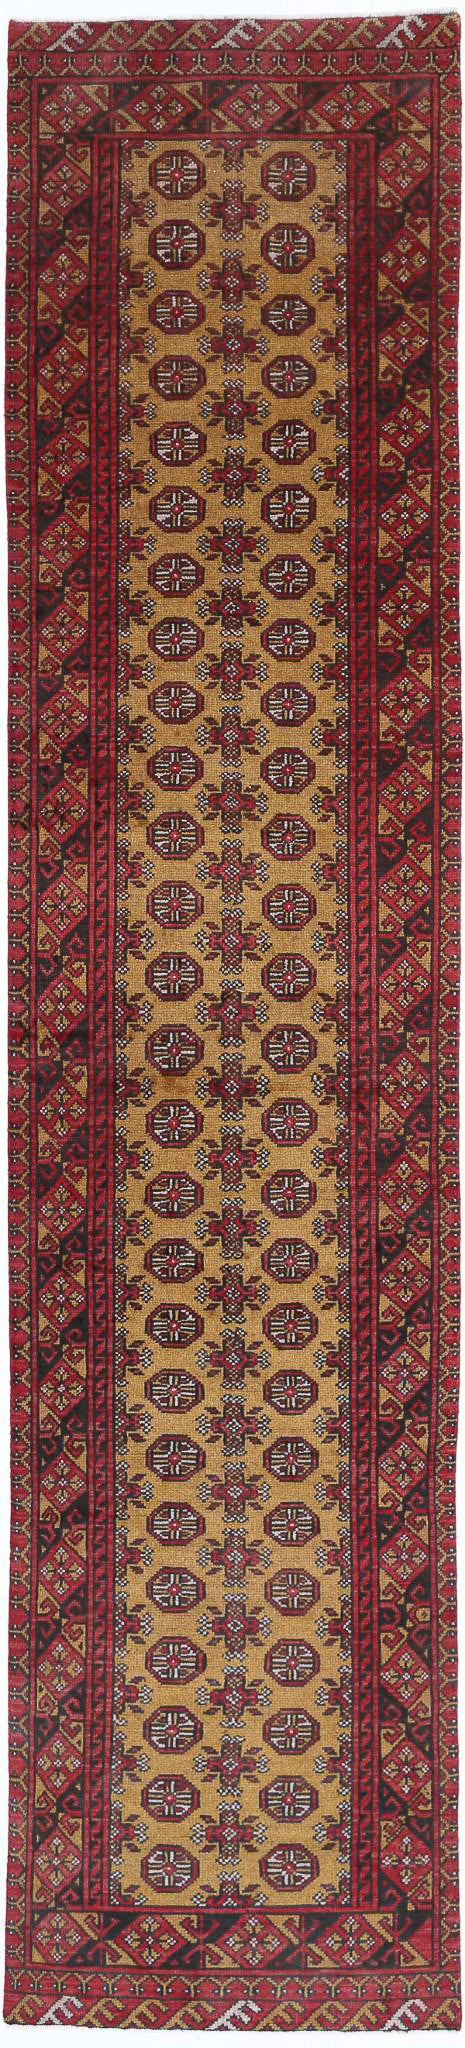 Revival-hand-knotted-gul-collection-wool-rug-5013987.jpg